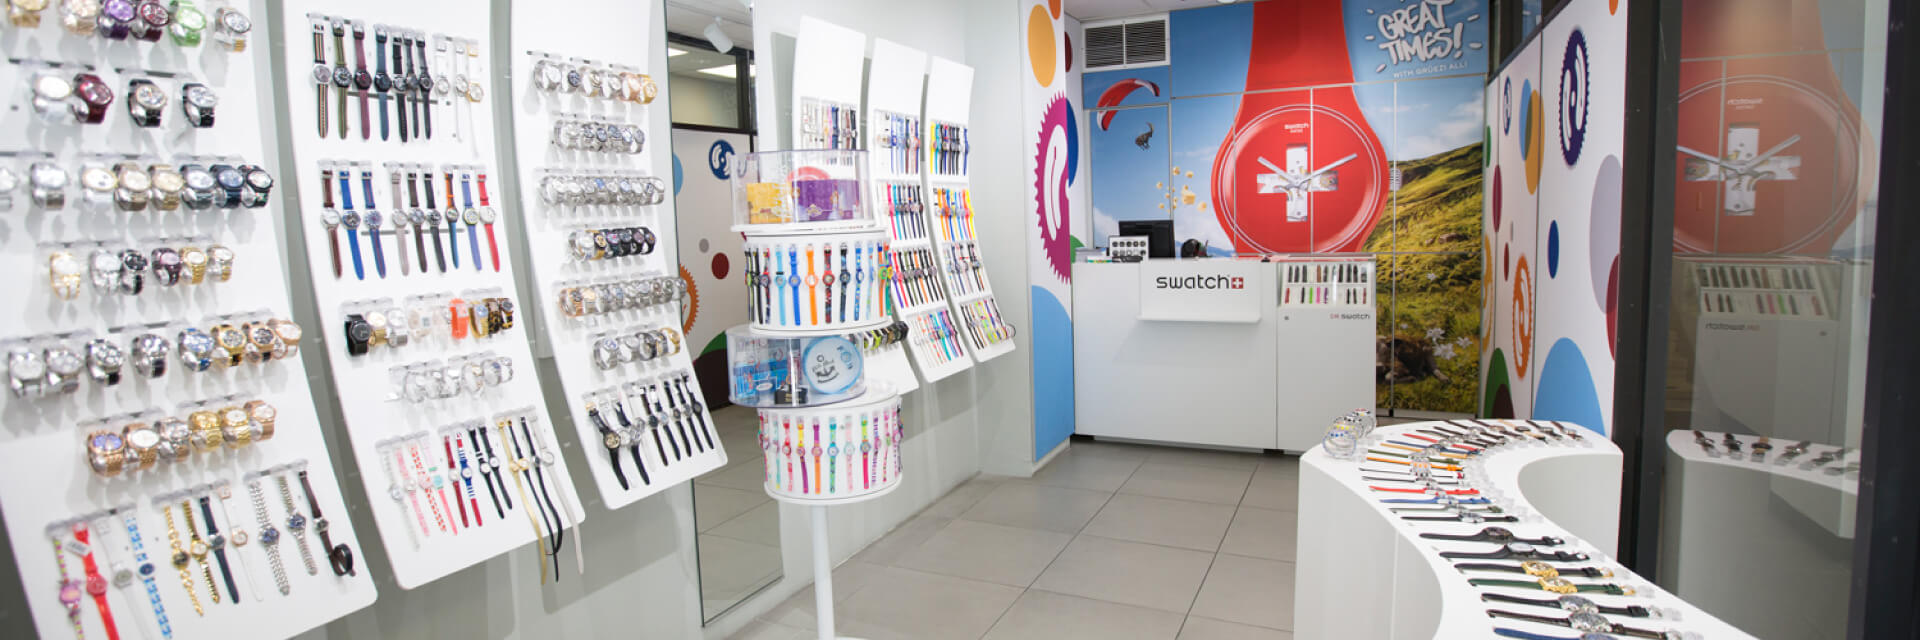 Swatch store interior in the Cayman Islands